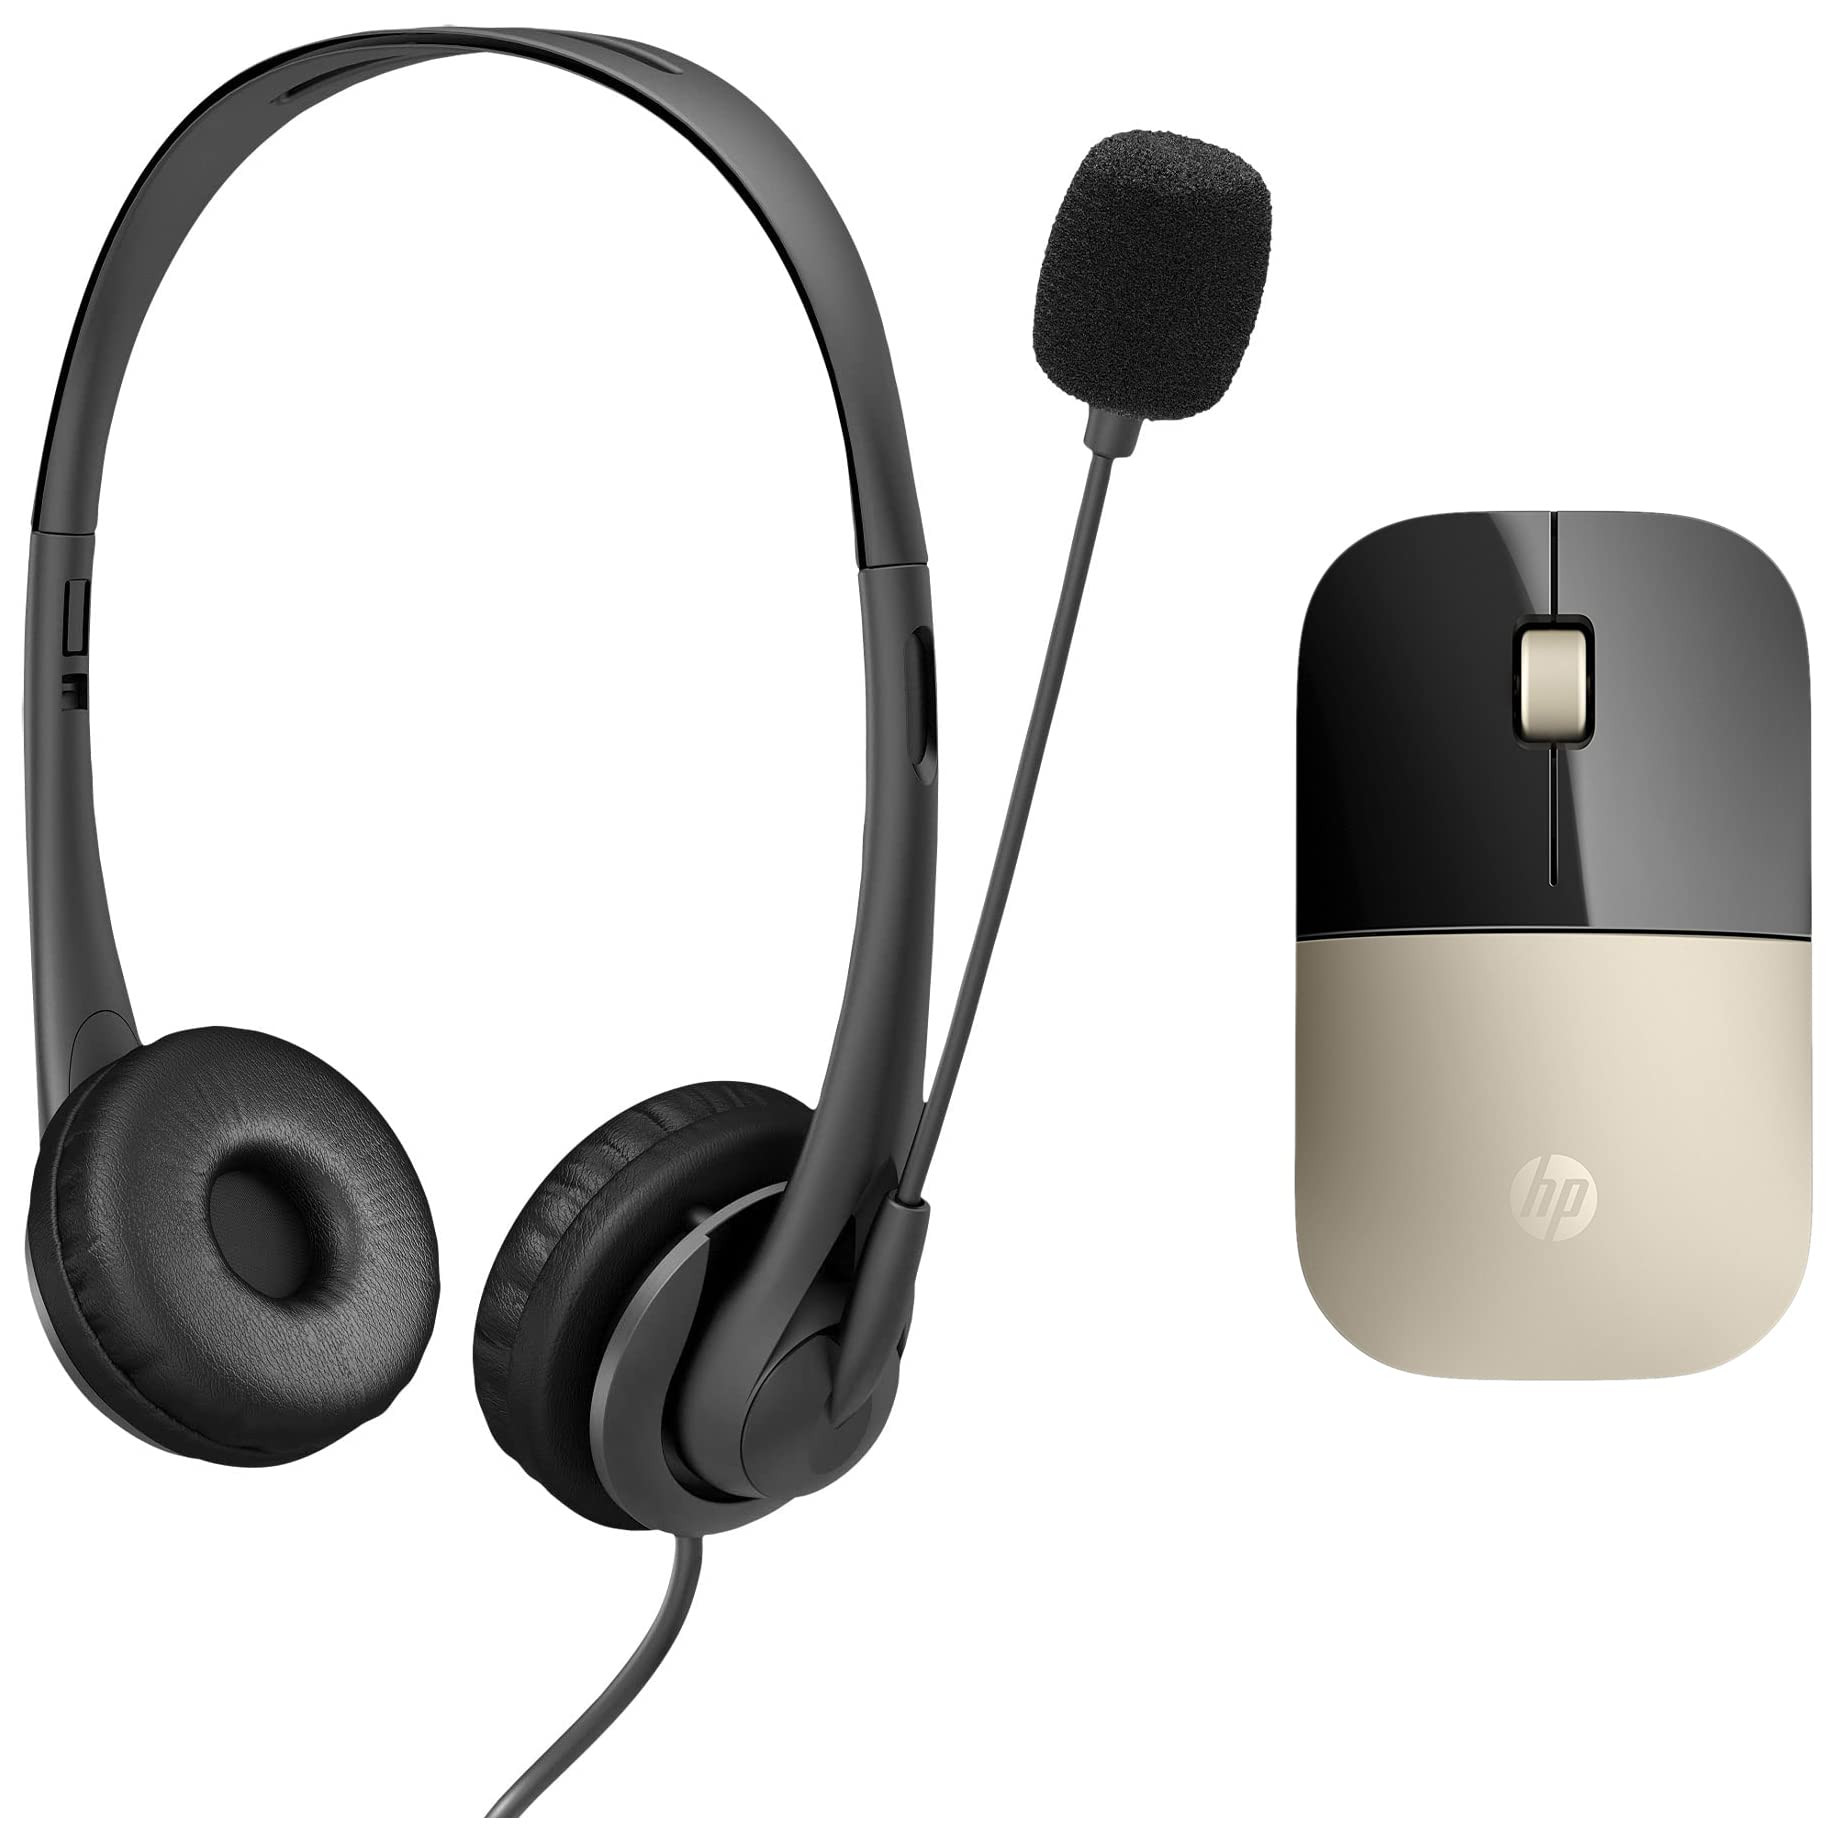 HP Stereo 3.5Mm G2 Wired Over Ear Headphones with Vegan Leather Earcups,  with Mic, Volume